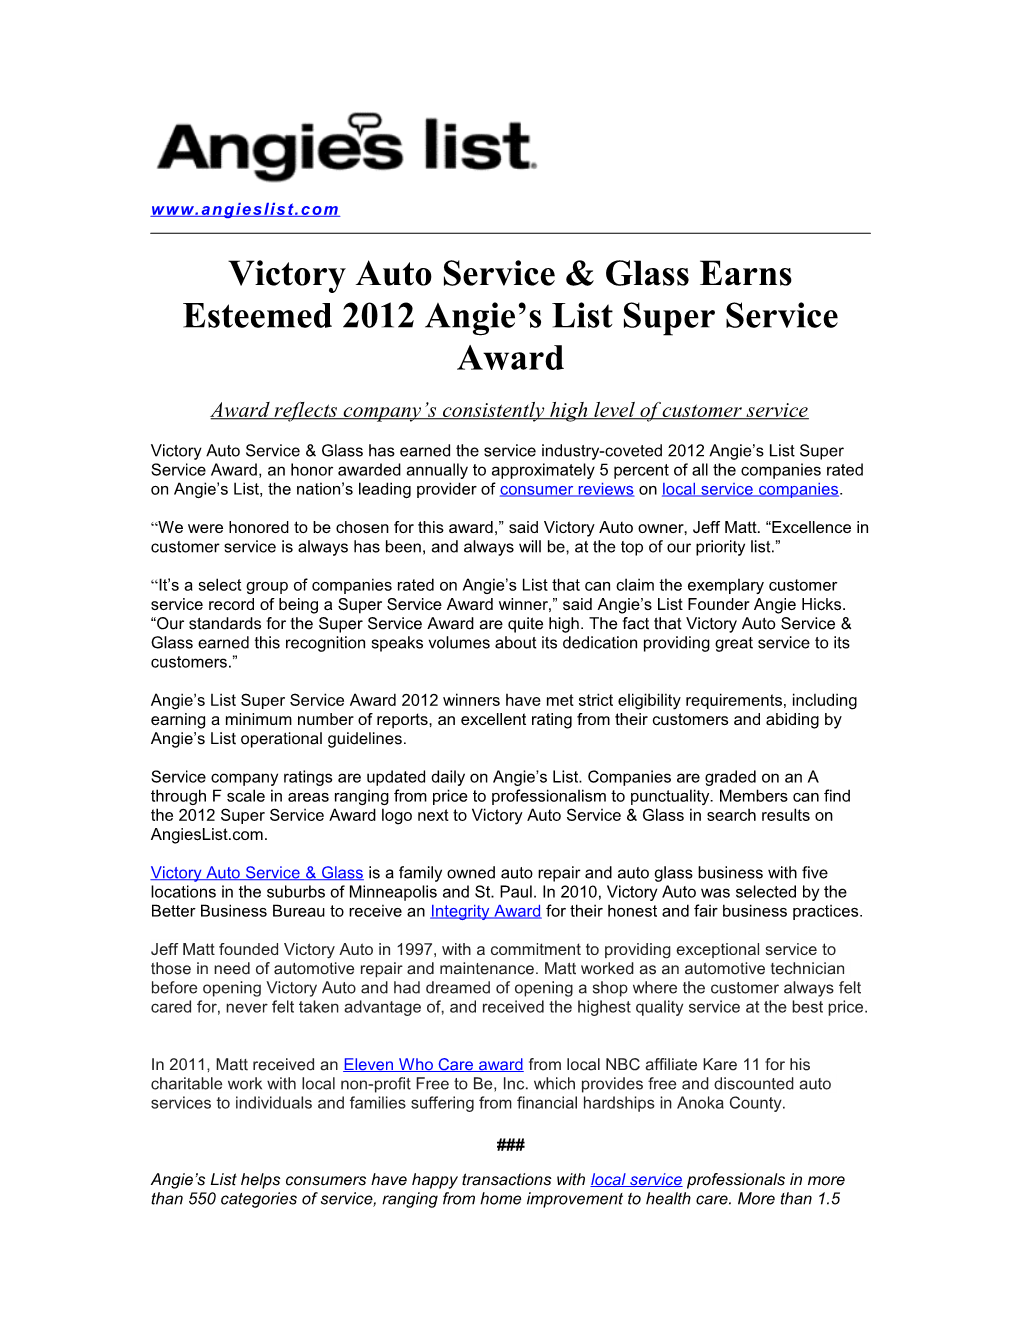 Victory Auto Service & Glass Earns Esteemed 2012 Angie S List Super Service Award